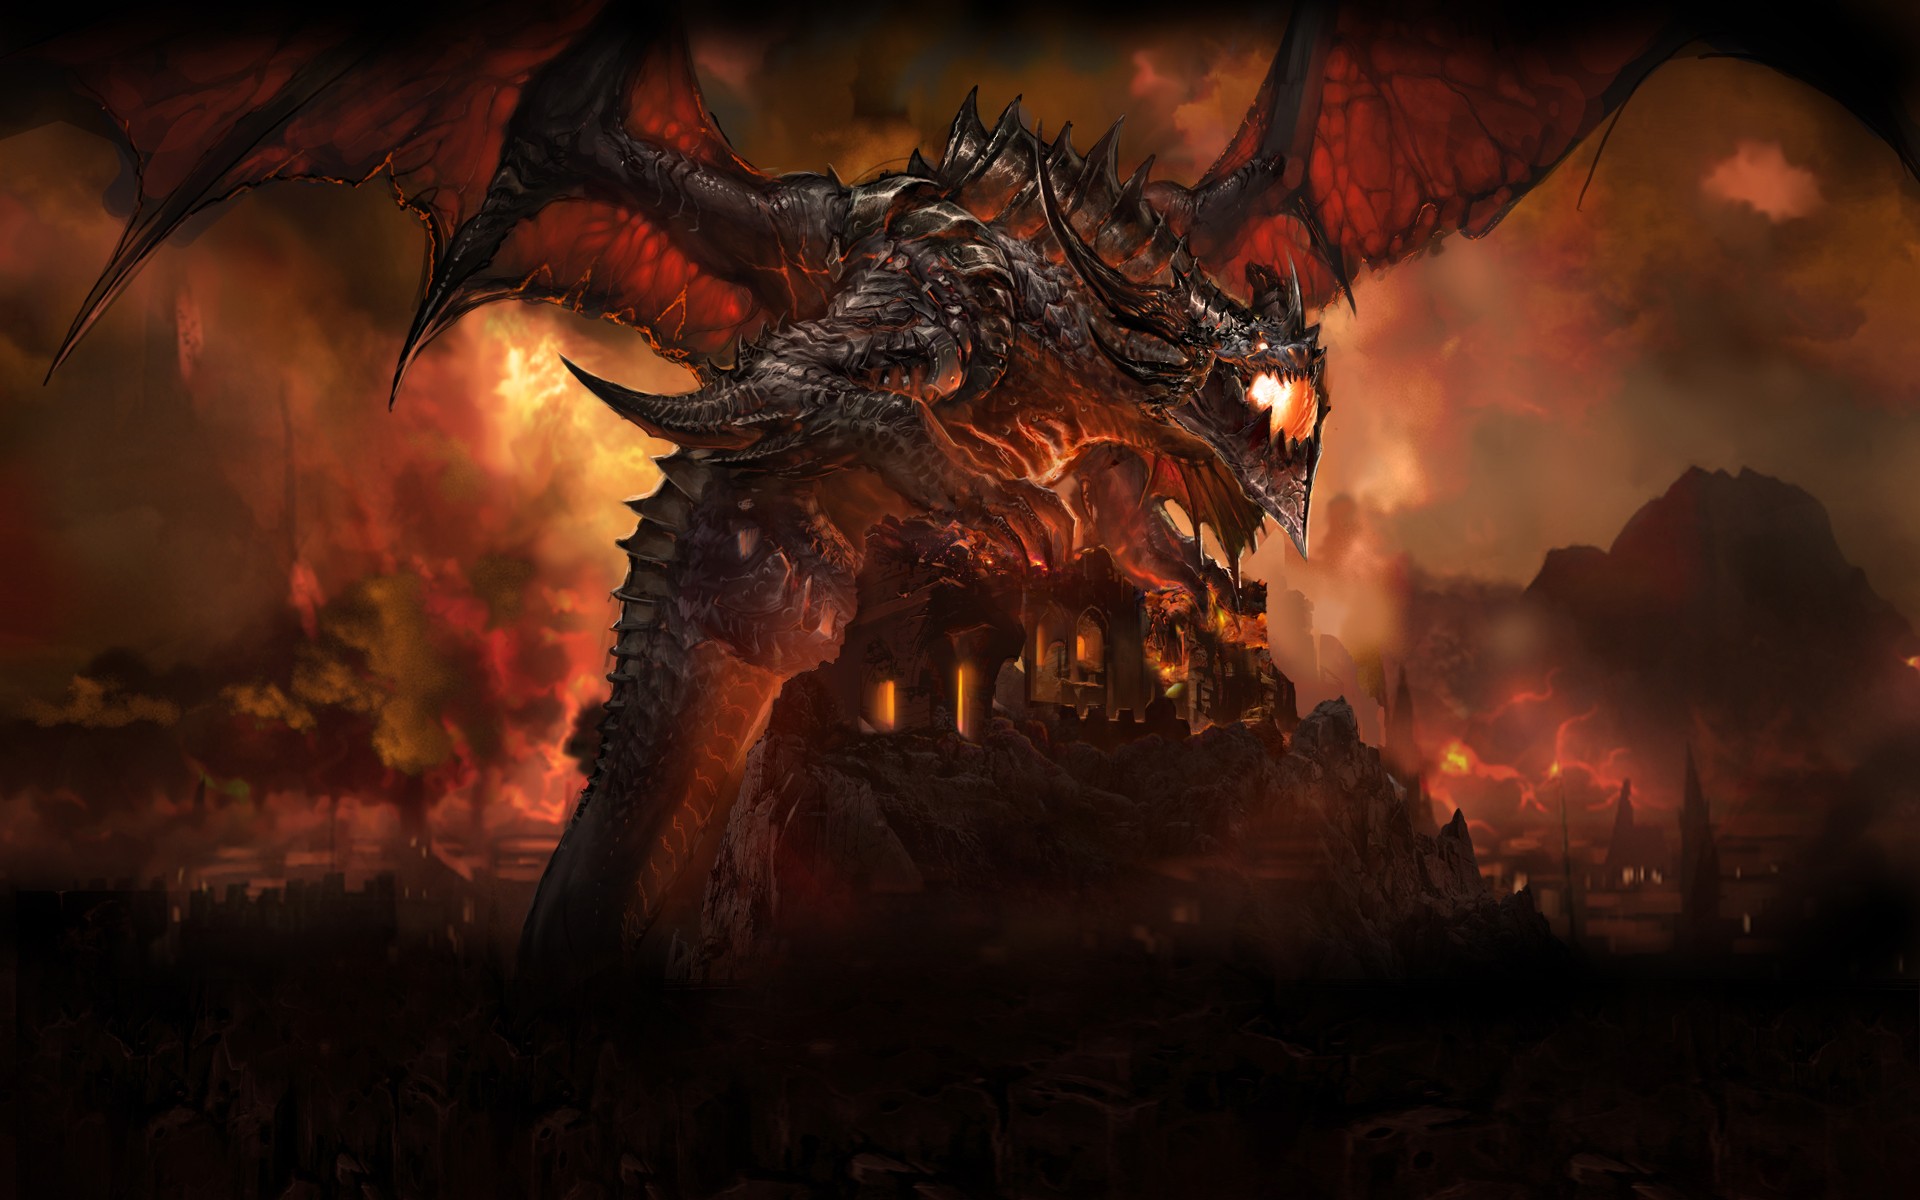 General 1920x1200 World of Warcraft: Cataclysm Deathwing dragon Hearthstone: Heroes of Warcraft World of Warcraft video games PC gaming fantasy art creature